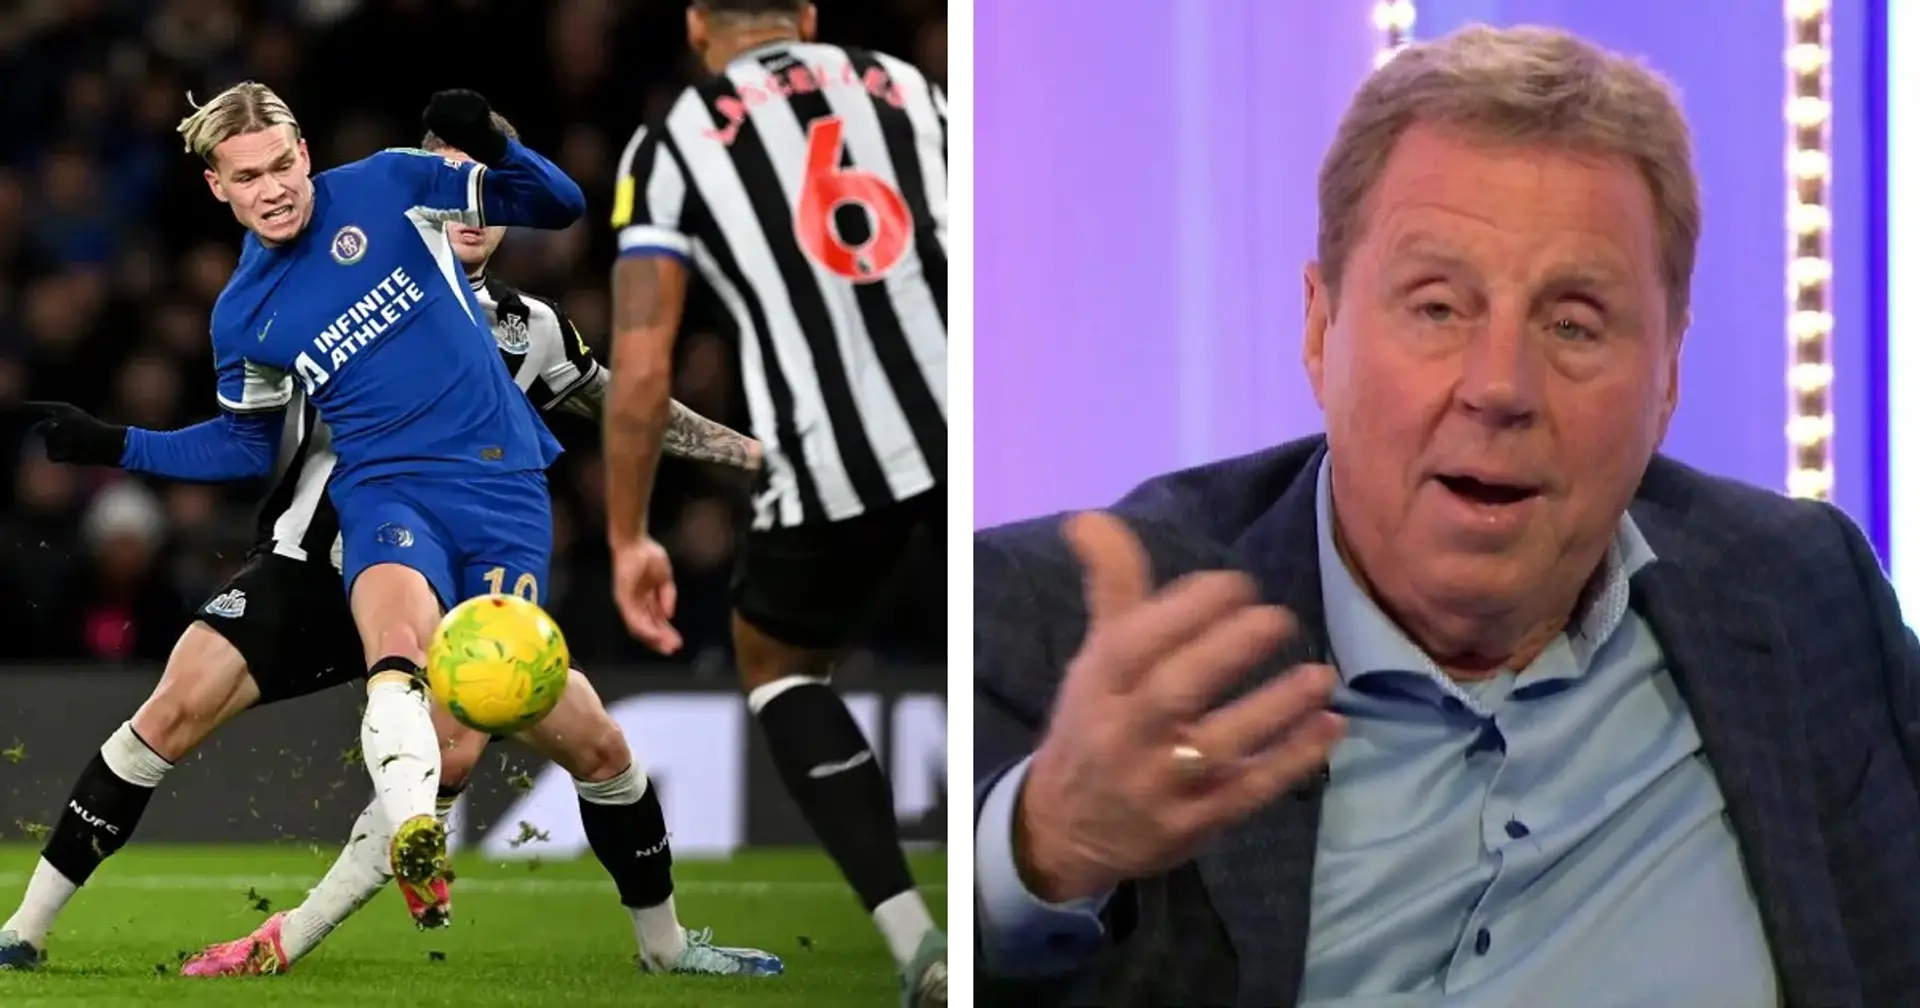 'He don’t know the game': Redknapp bizarrely criticizes Mudryk for his 92nd minute equalizer against Newcastle